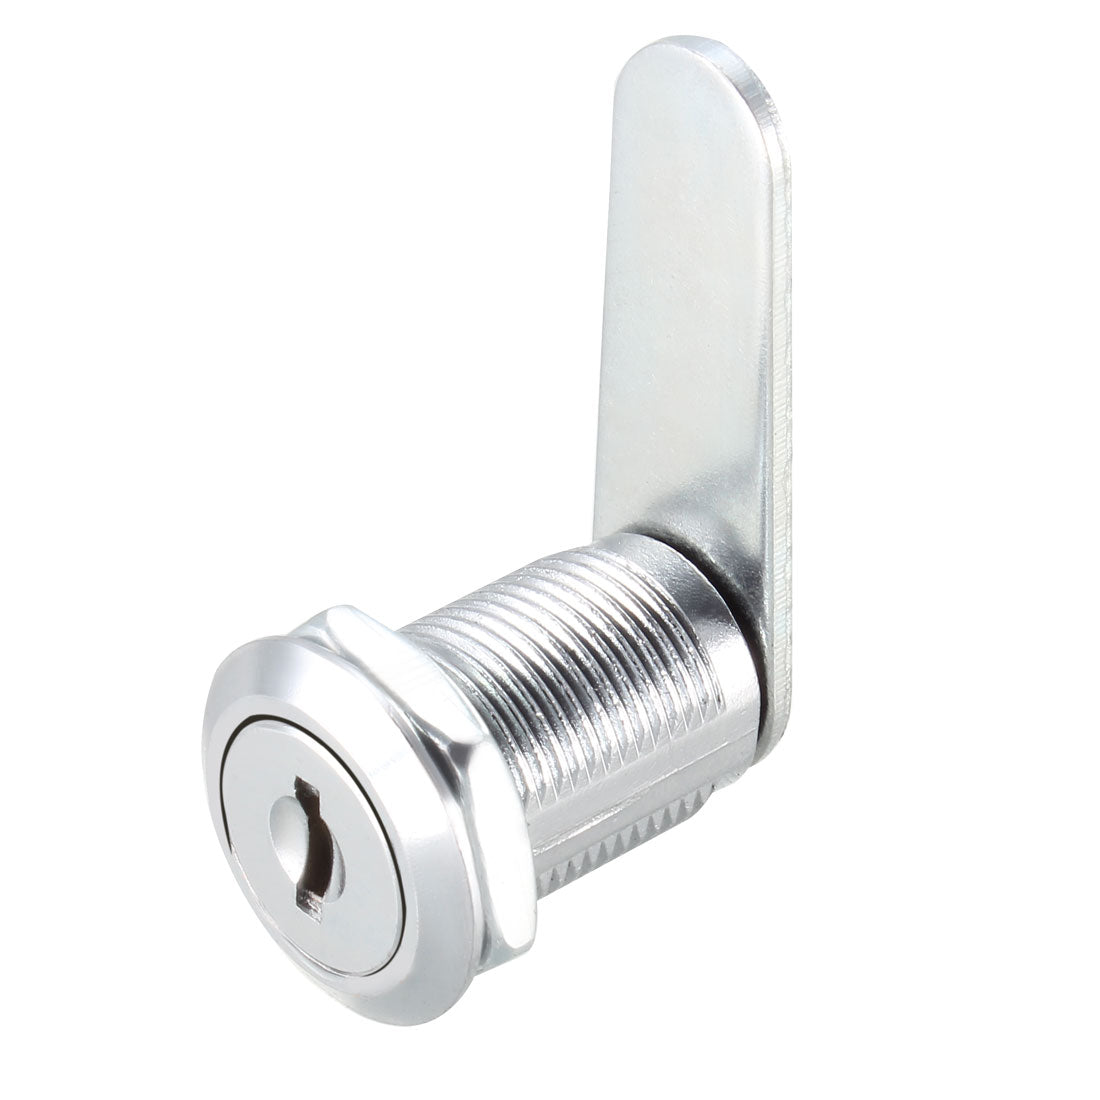 uxcell Uxcell Cam Lock 25mm Cylinder Length Fits Max 5/8-inch Thick Panel Keyed Alike 2Pcs